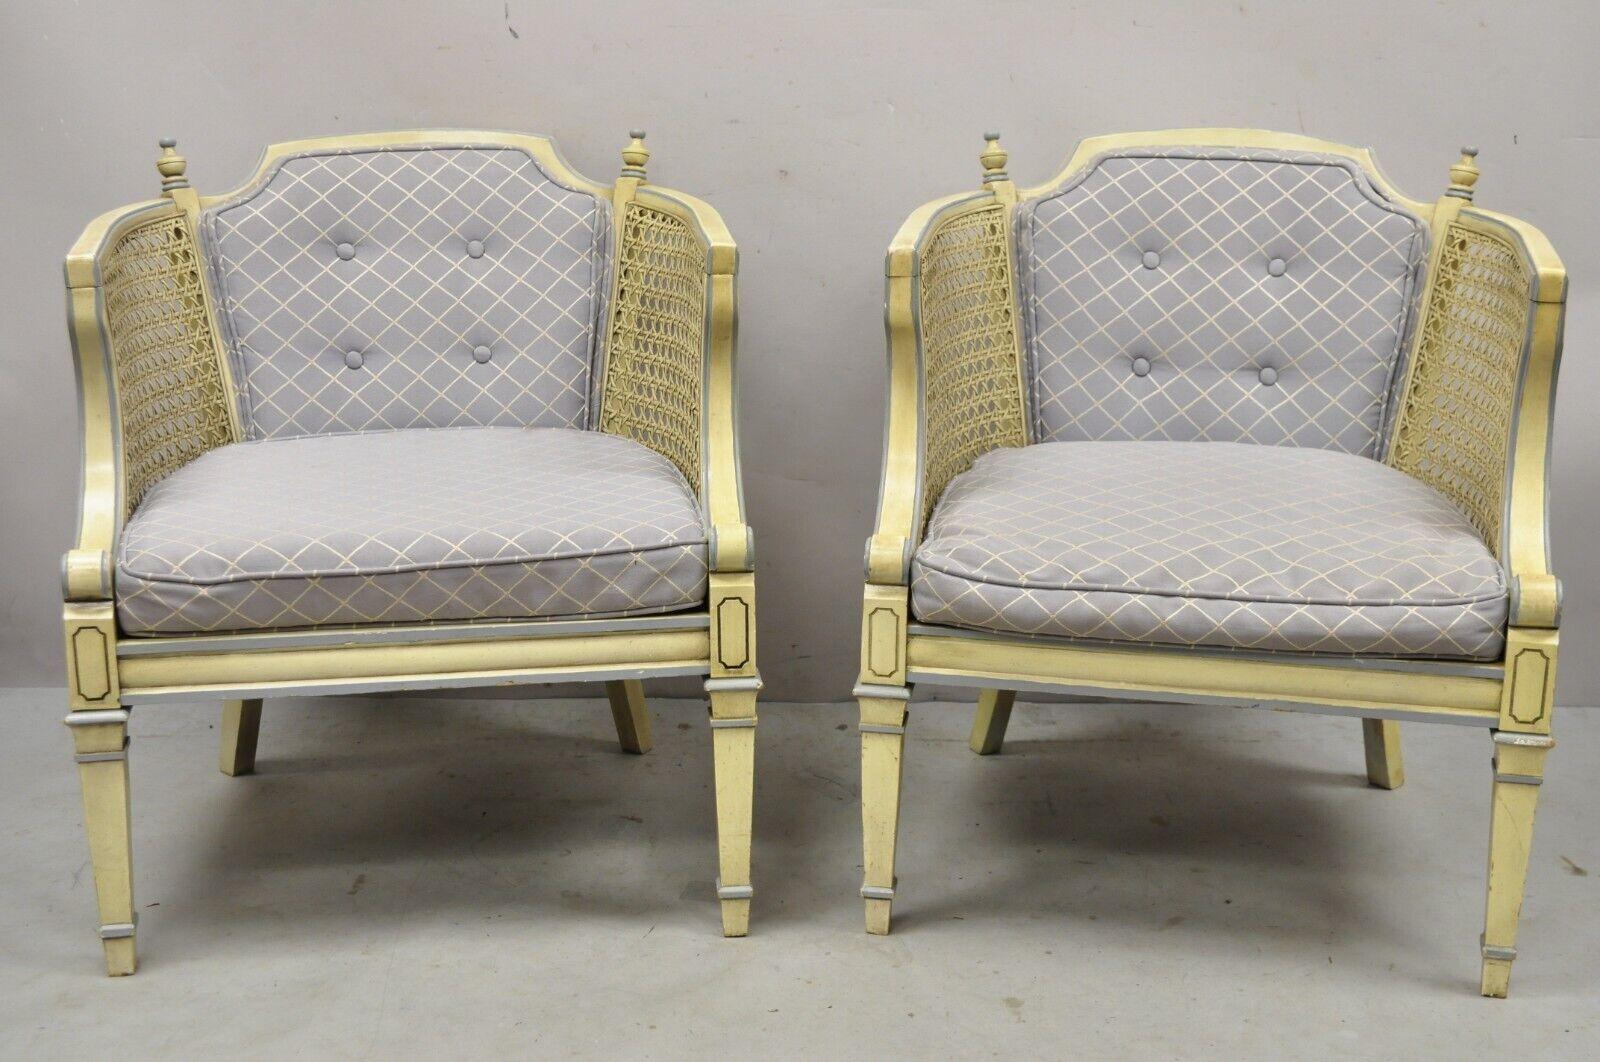 Vintage Hollywood Regency cream painted cane side club lounge chairs - a pair. Item features a cream painted finish, blue upholstery, cane panels, carved finials, solid wood frame, tapered legs, great style style and form. Circa late 20th century.